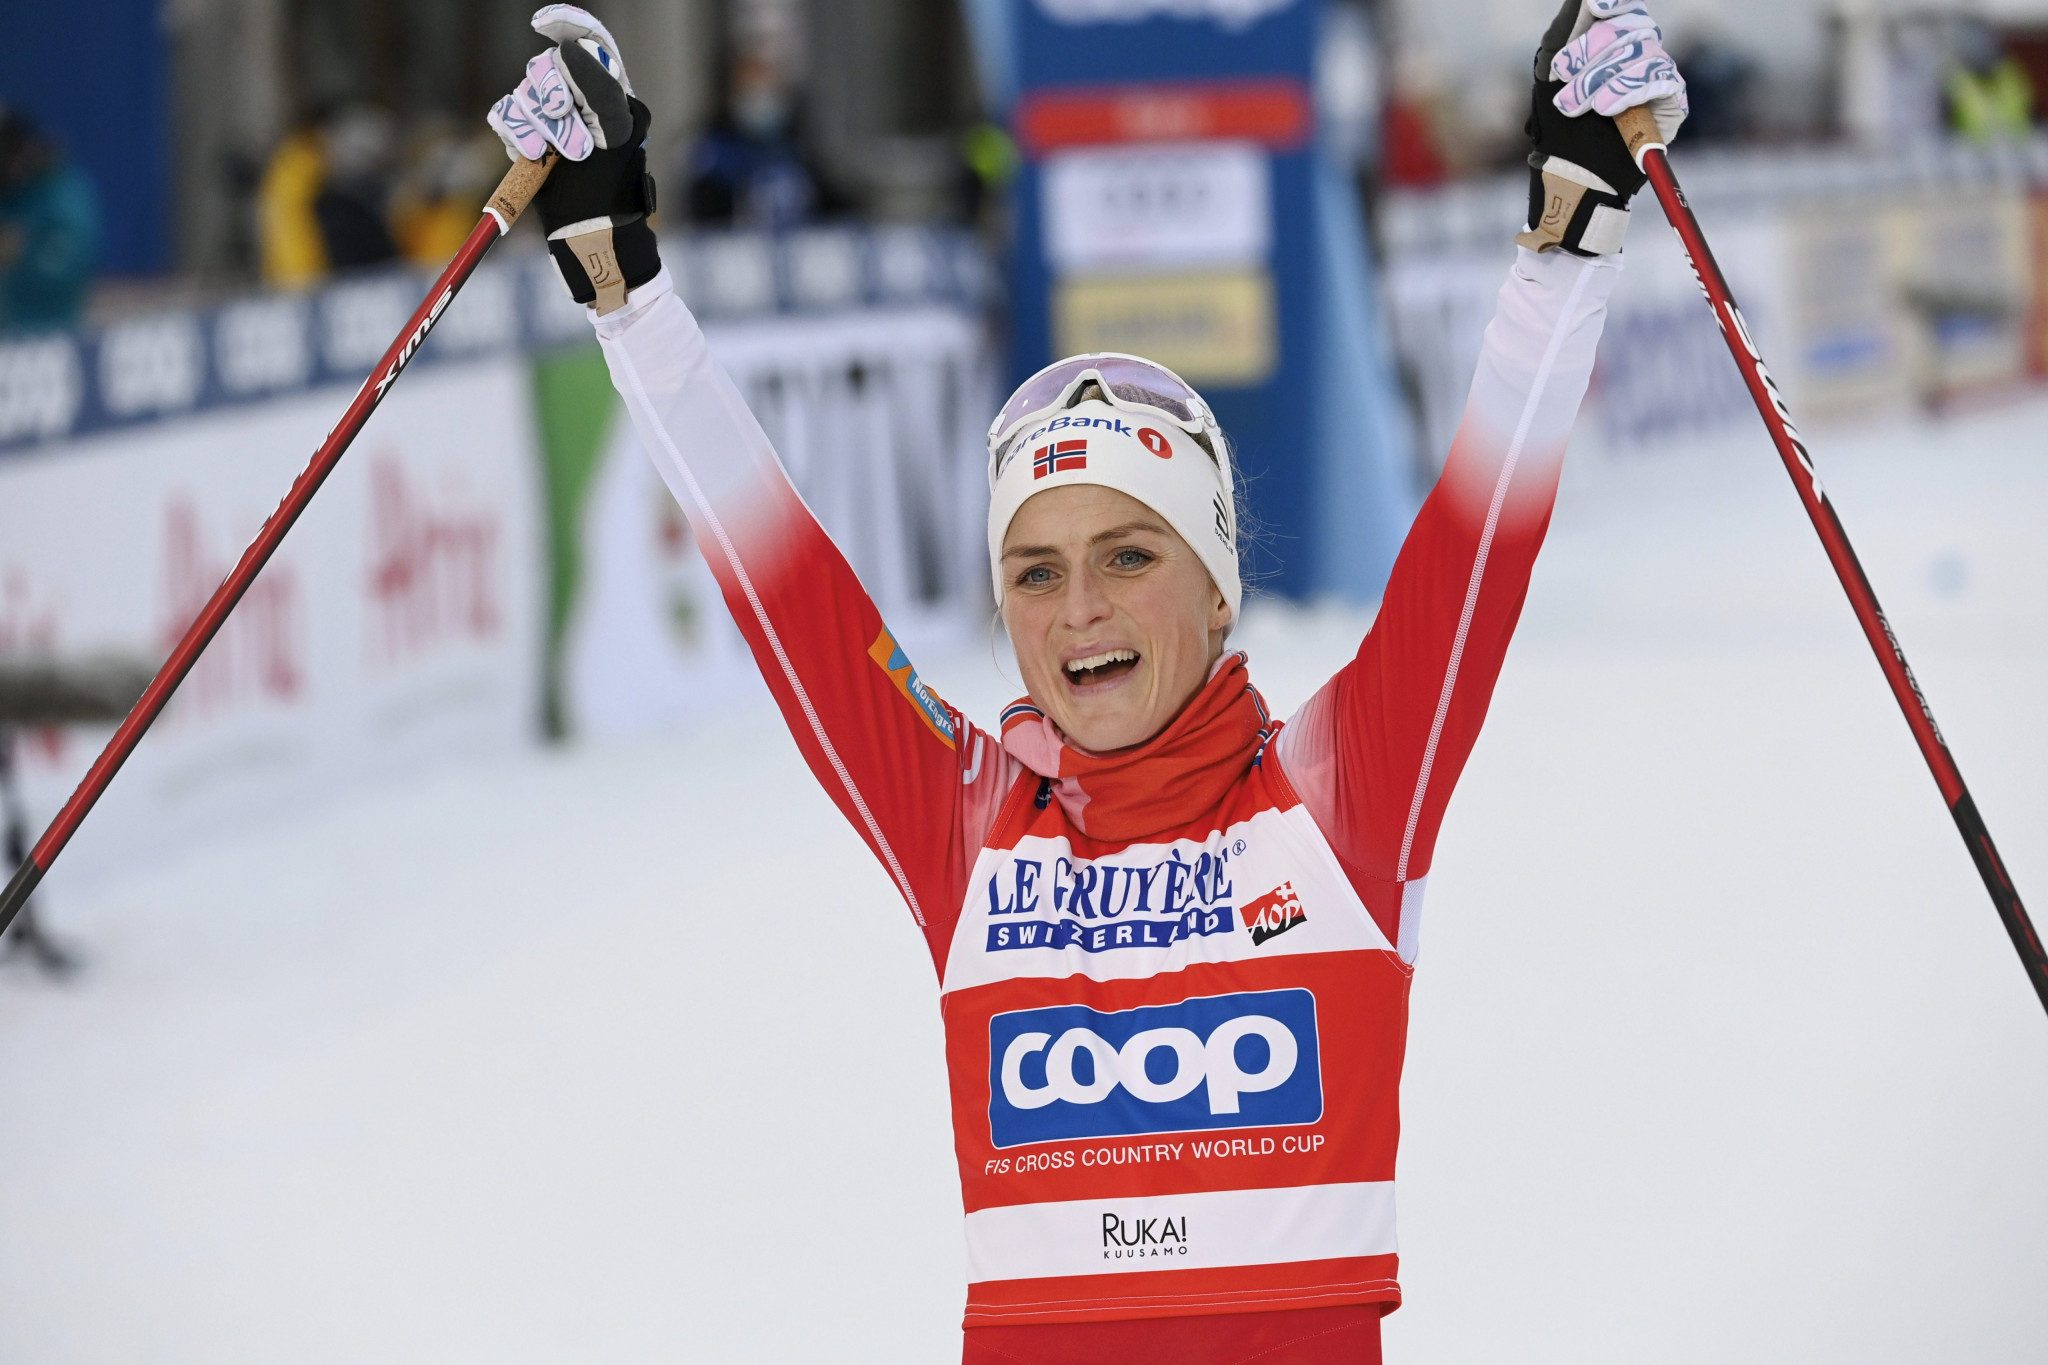 Therese Johaug won her second race of the World Cup weekend in Ruka ©Getty Images